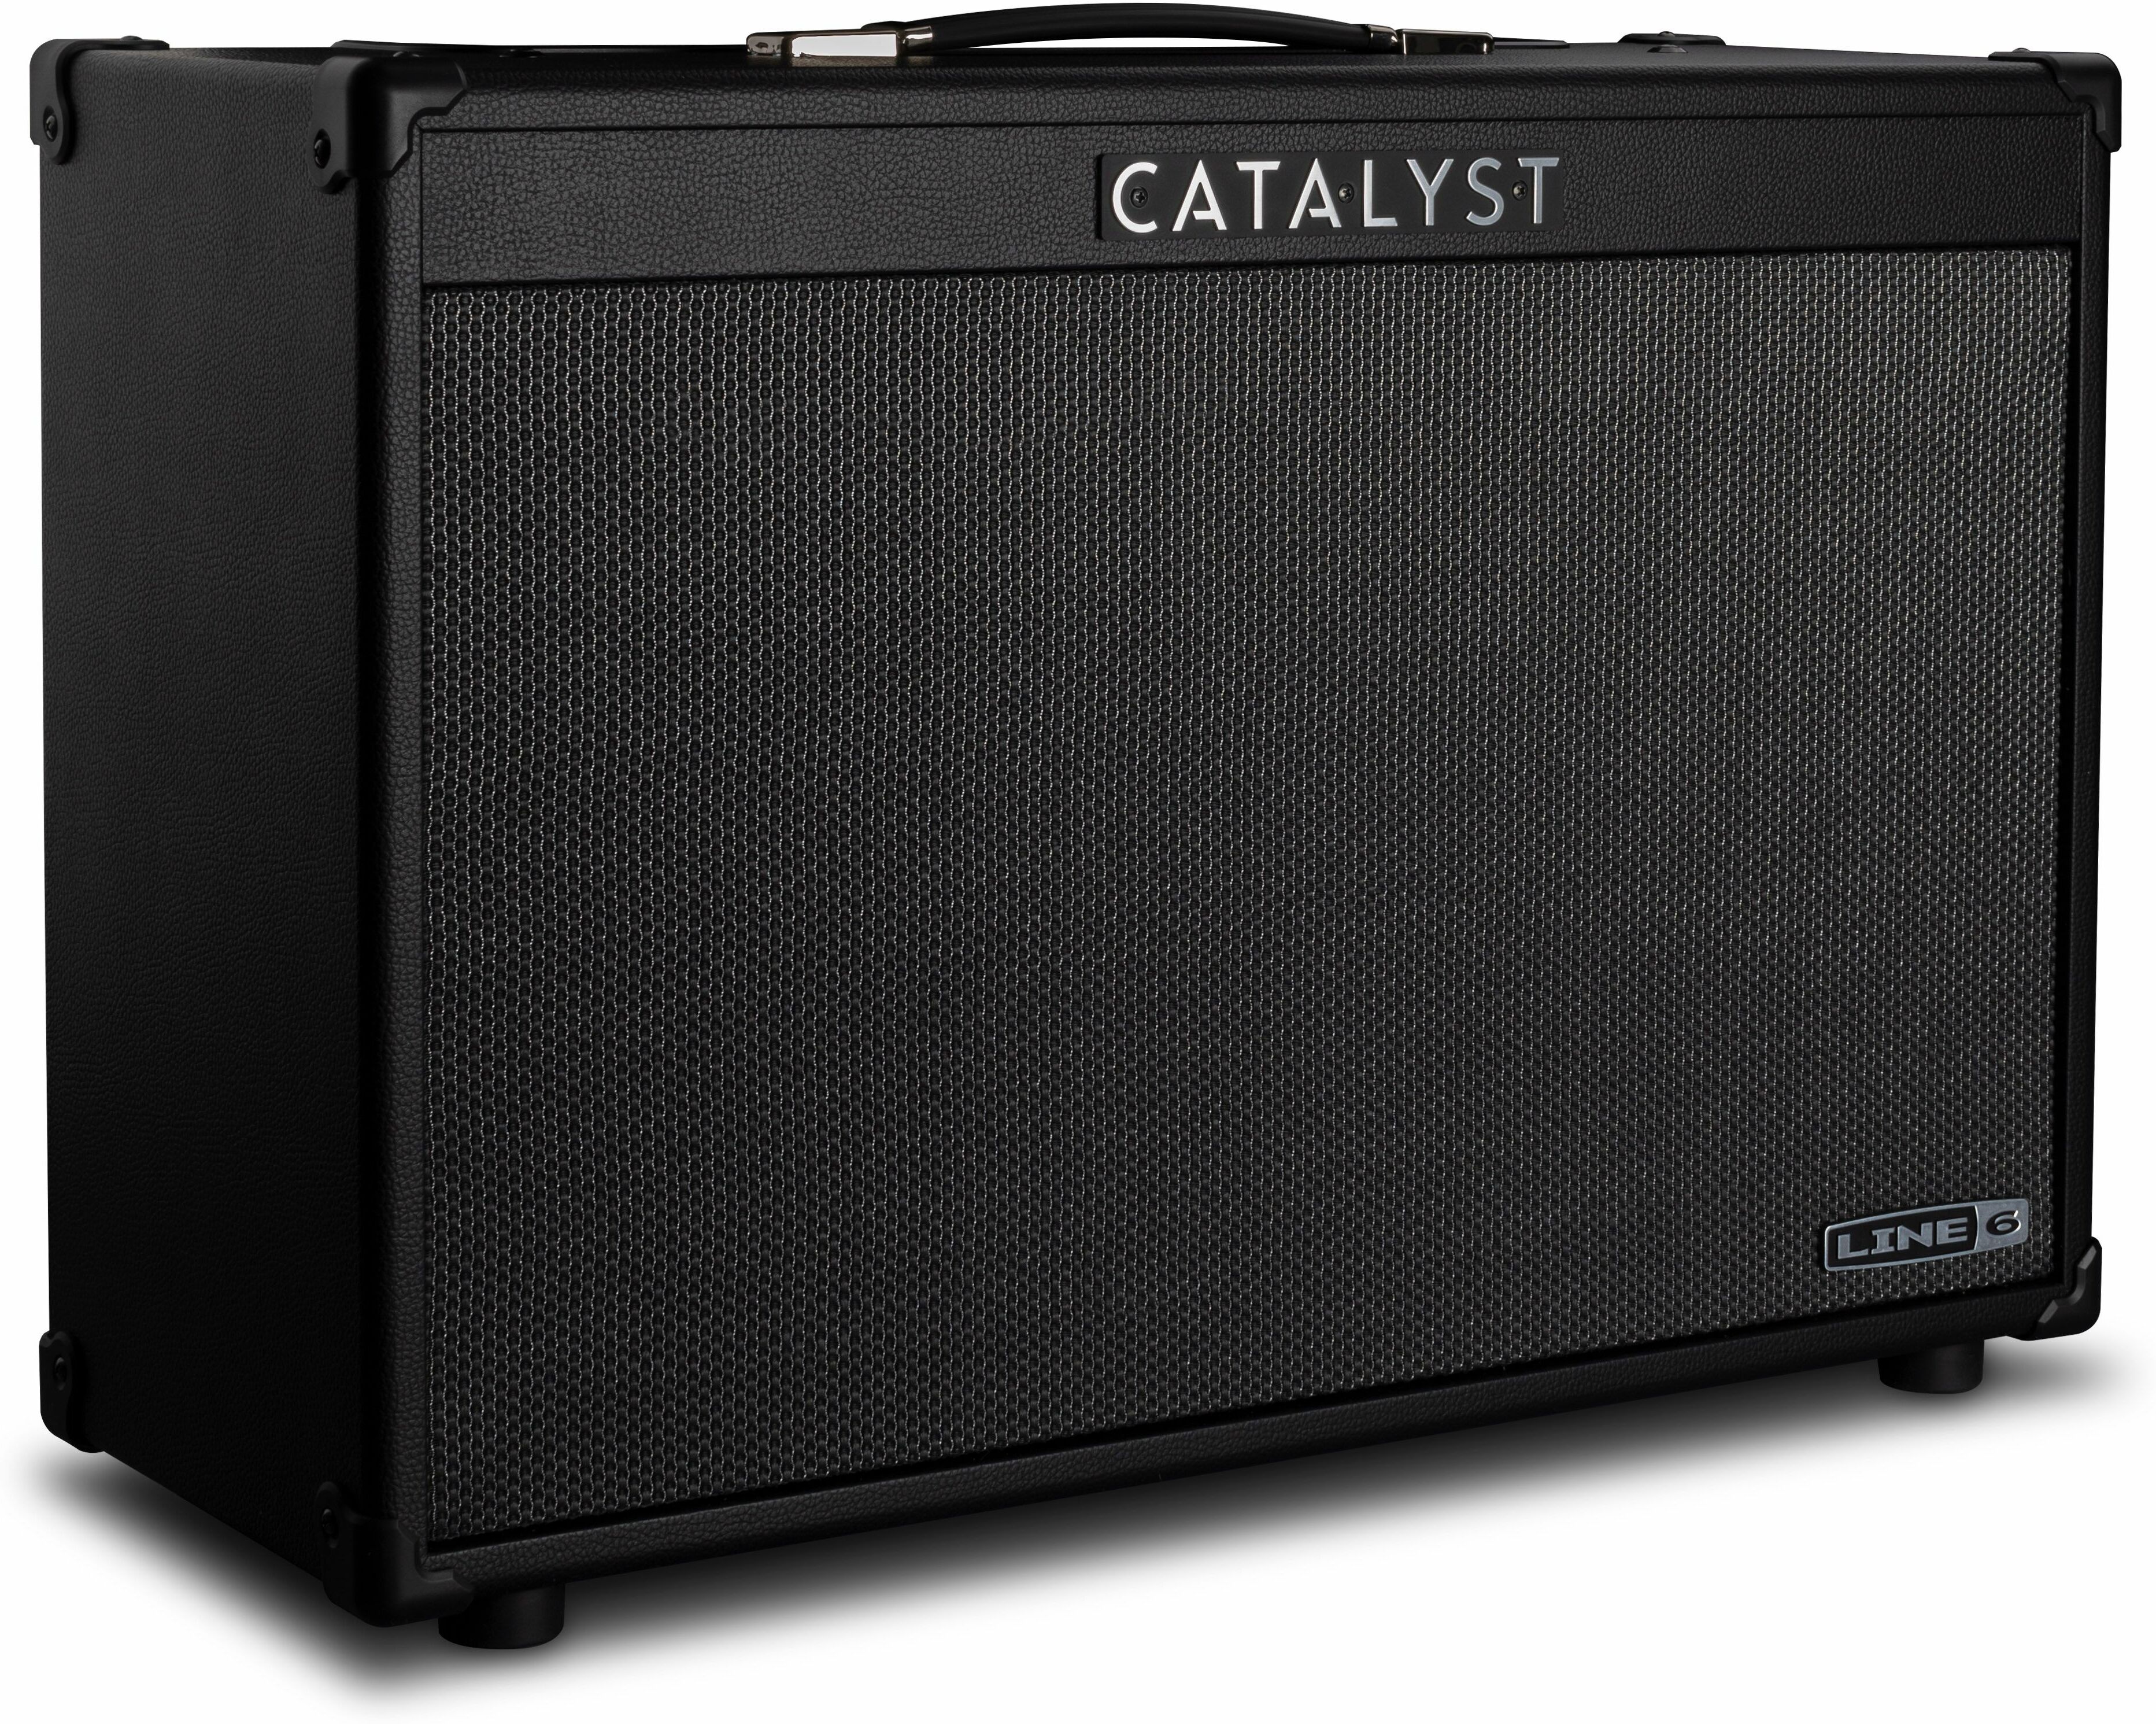 Line 6 Catalyst Combo 200w 2x12 - Electric guitar combo amp - Main picture